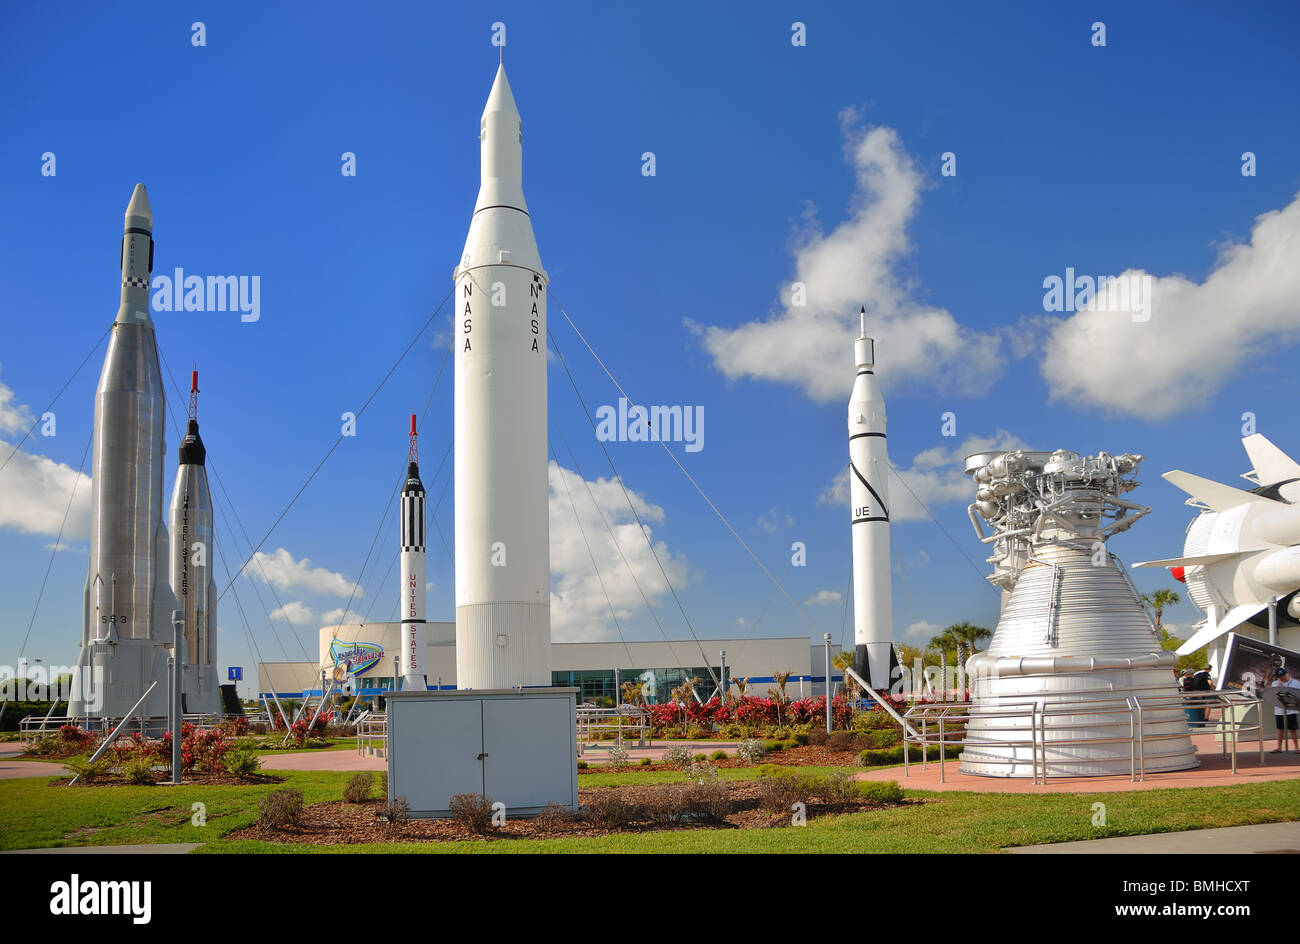 The Rocket Garden at The Kennedy Space Centre, Cape Canaveral, Florida, USA, has recently been redeveloped. Stock Photo